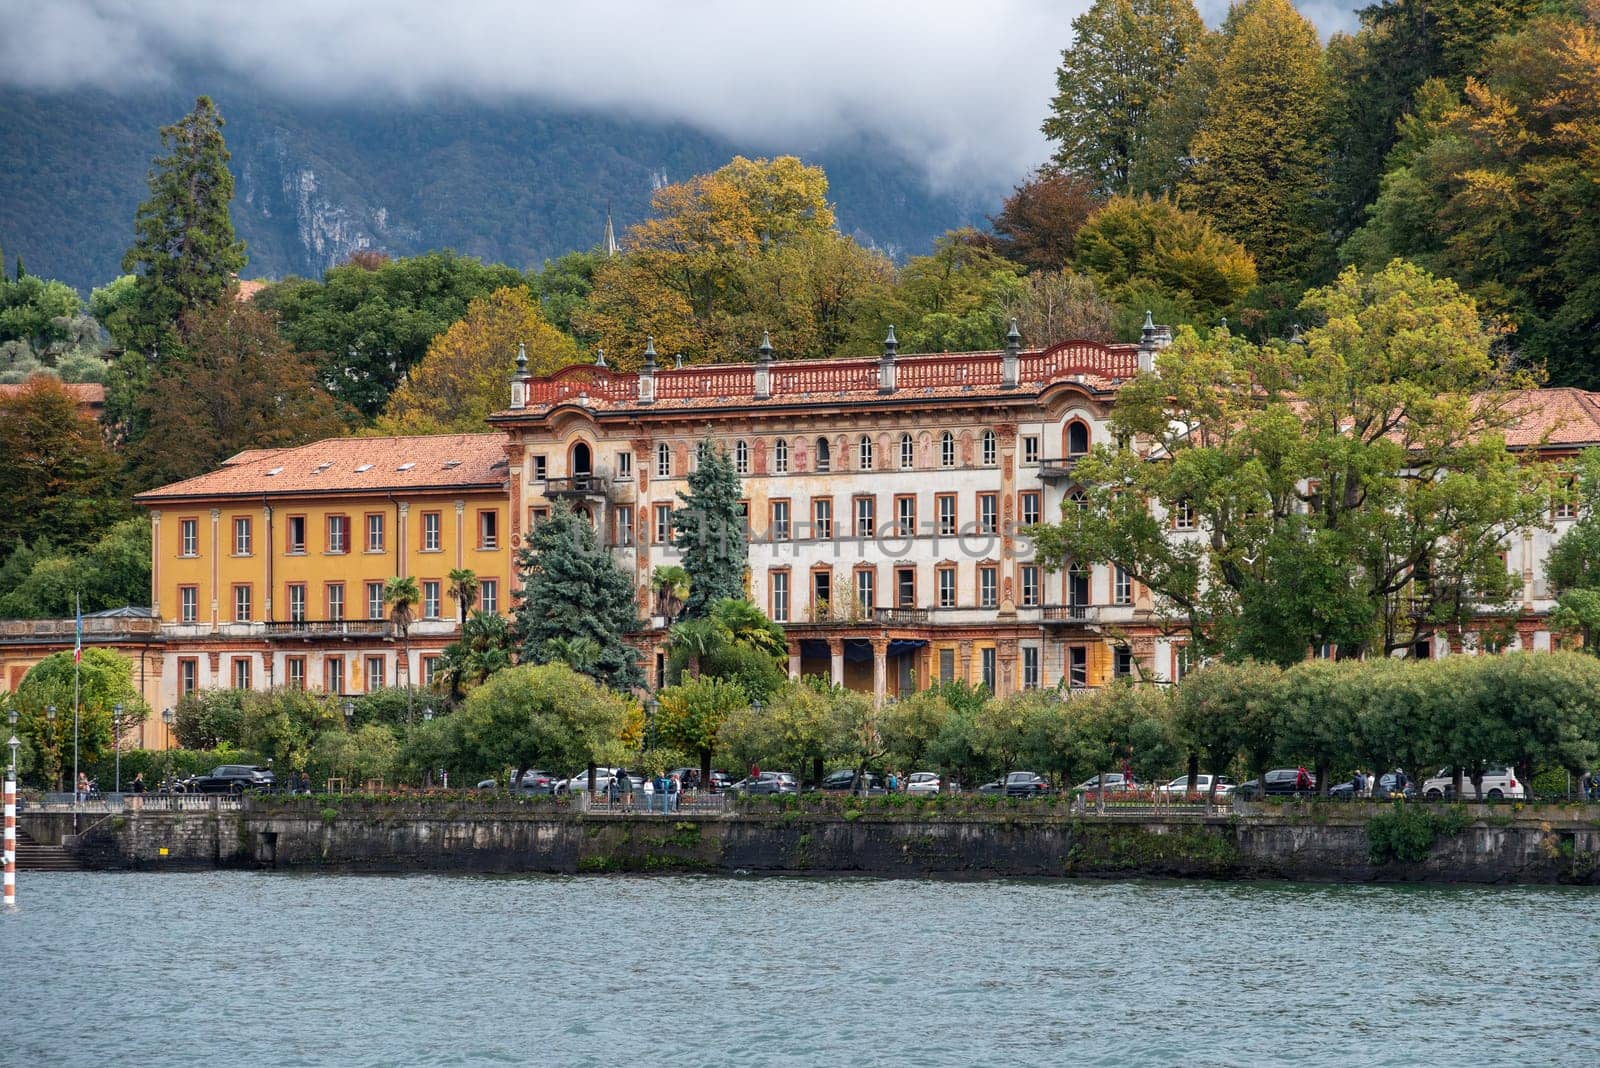 Ruin of an old hotel palace in Bellagio at lake Como by imagoDens